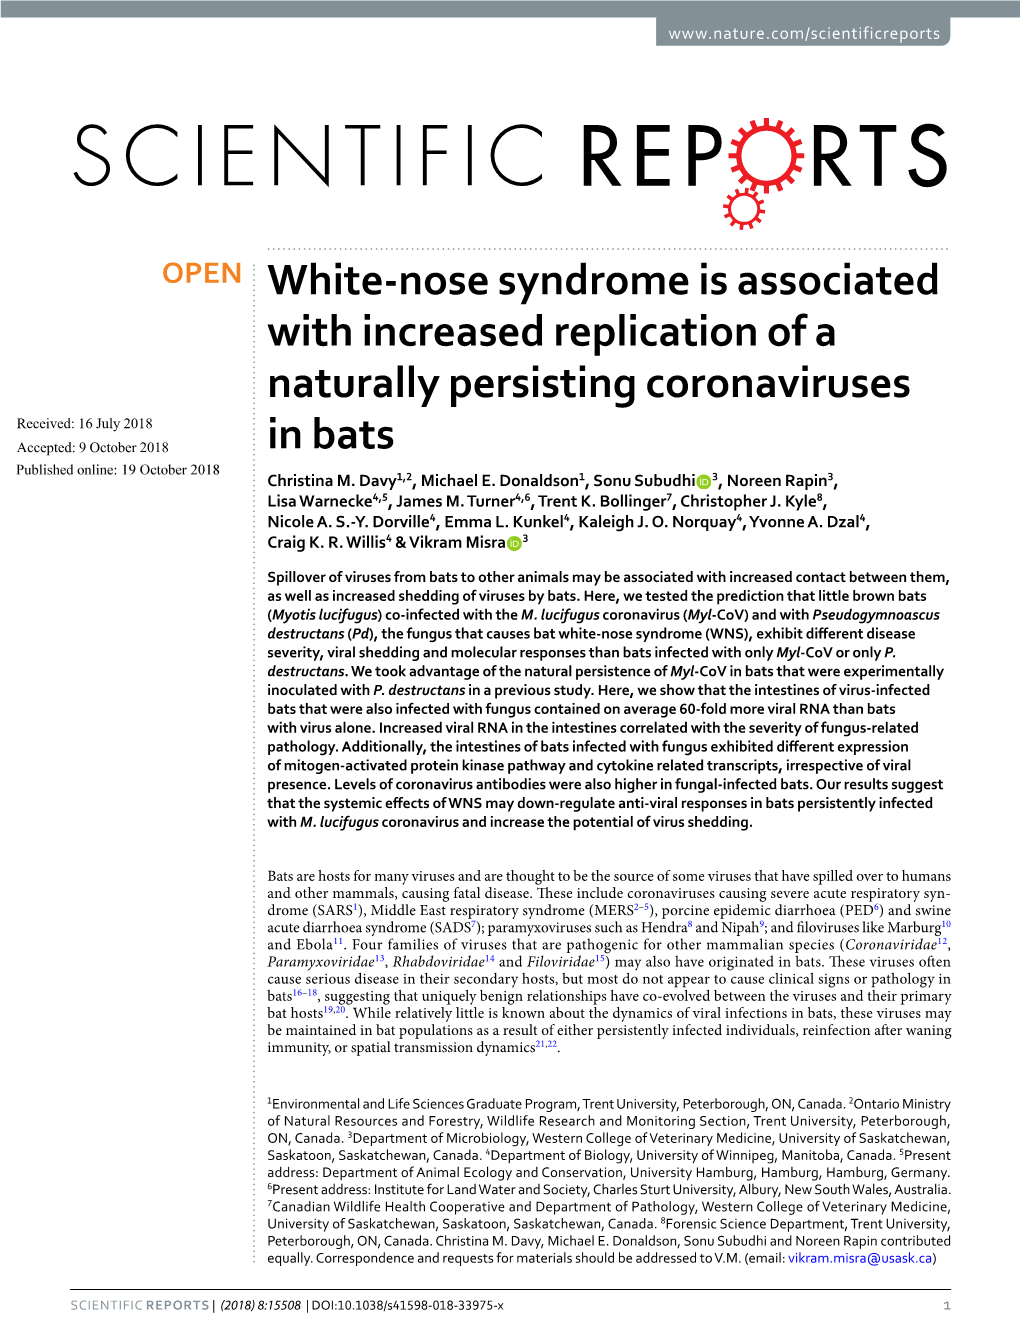 White-Nose Syndrome Is Associated with Increased Replication of A